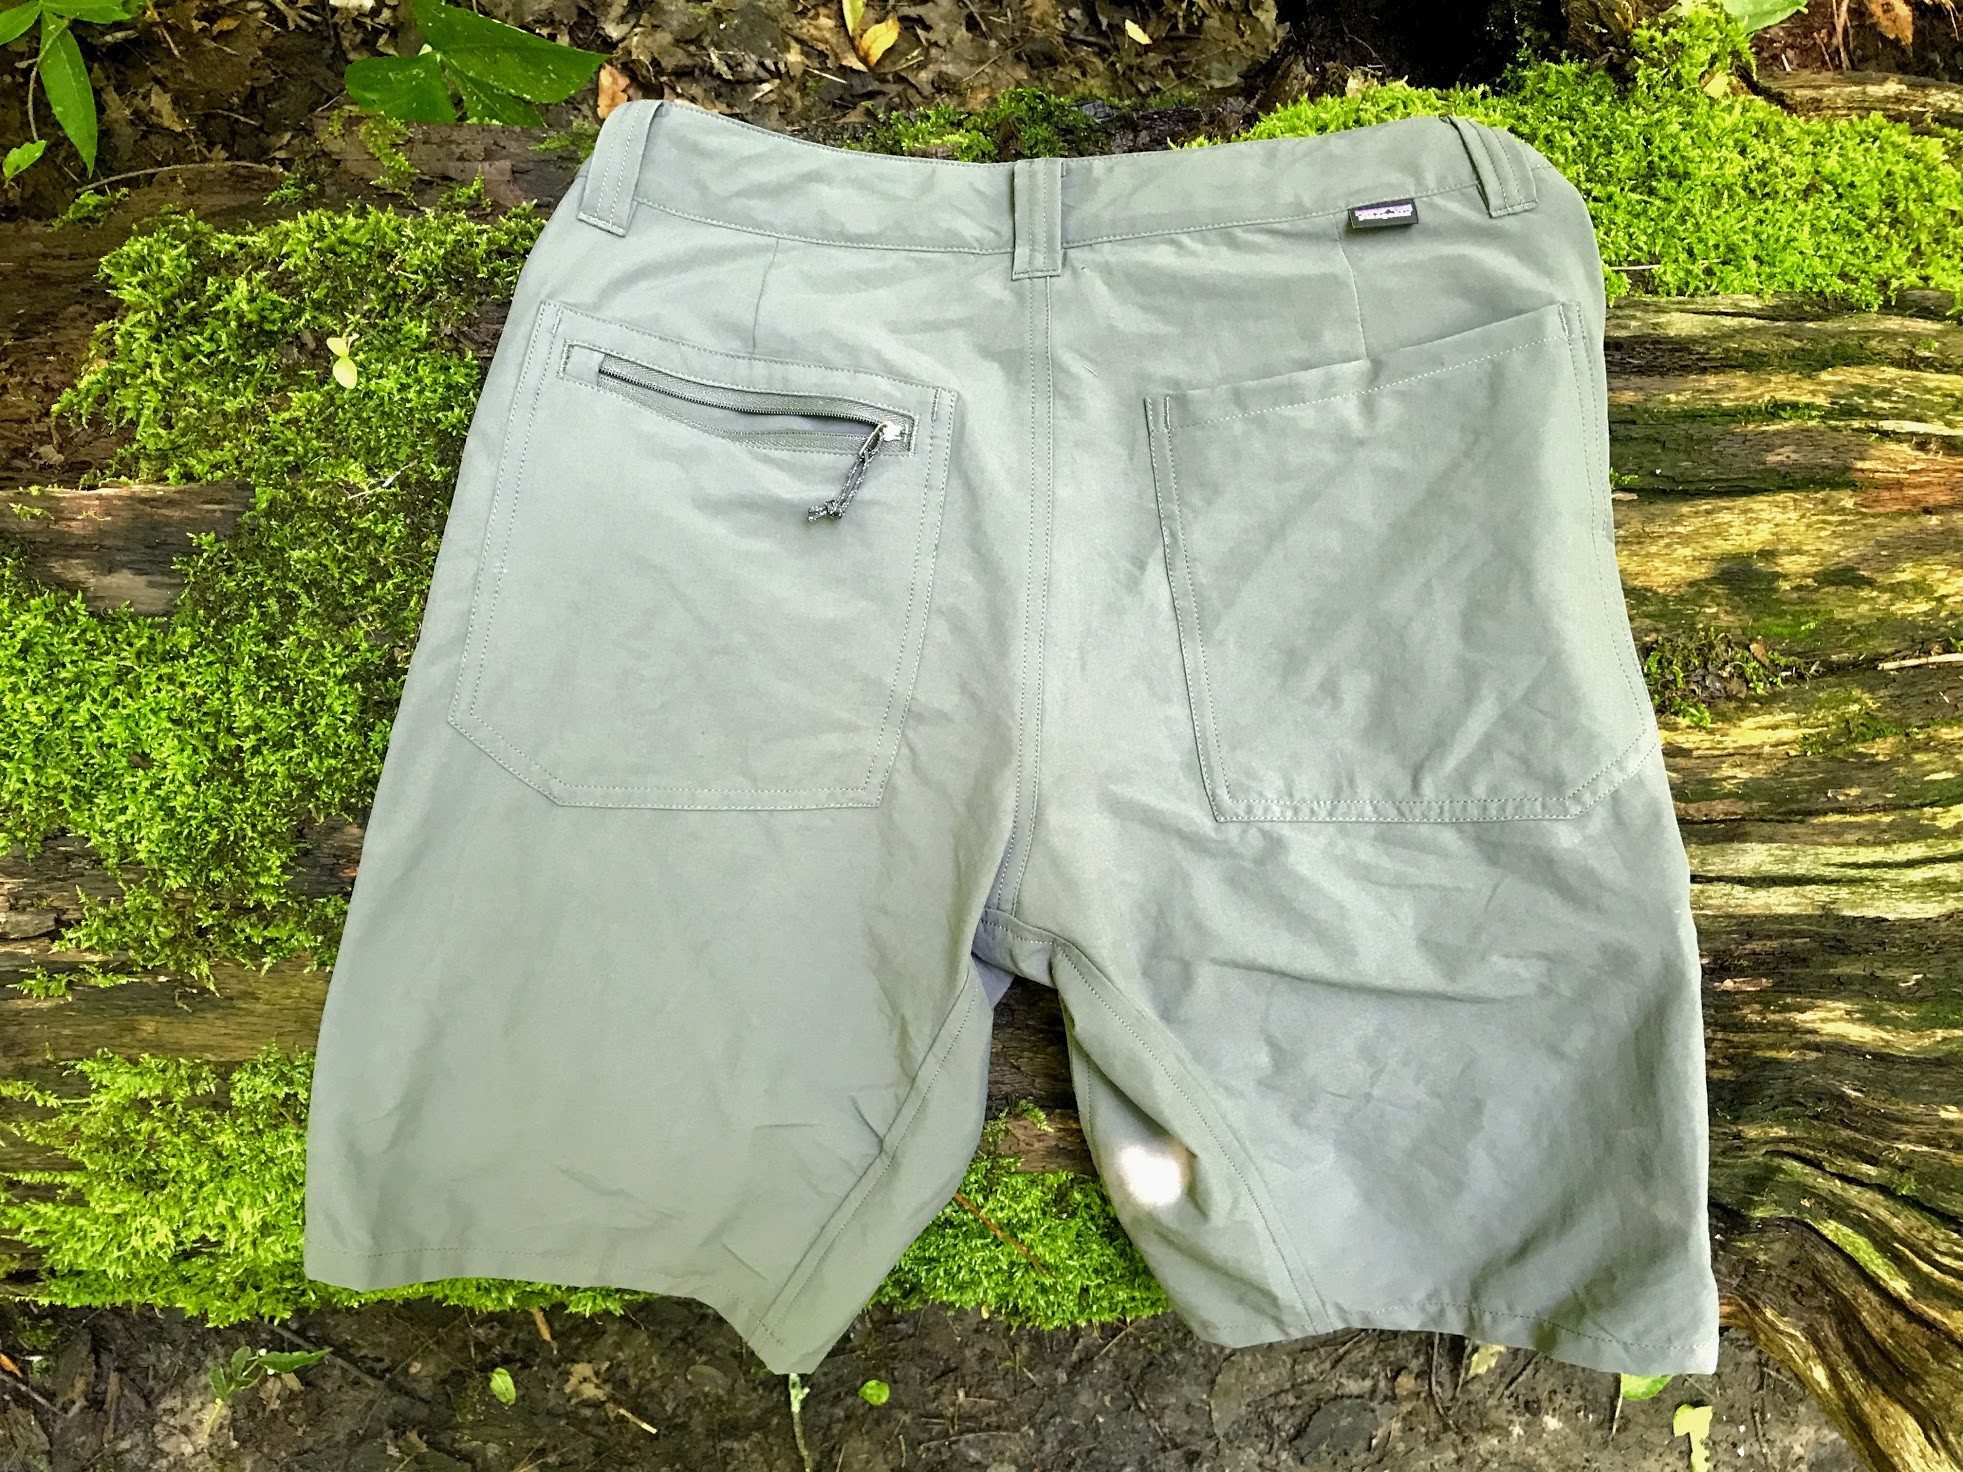 Patagonia Quandary Short Review | Tested by GearLab